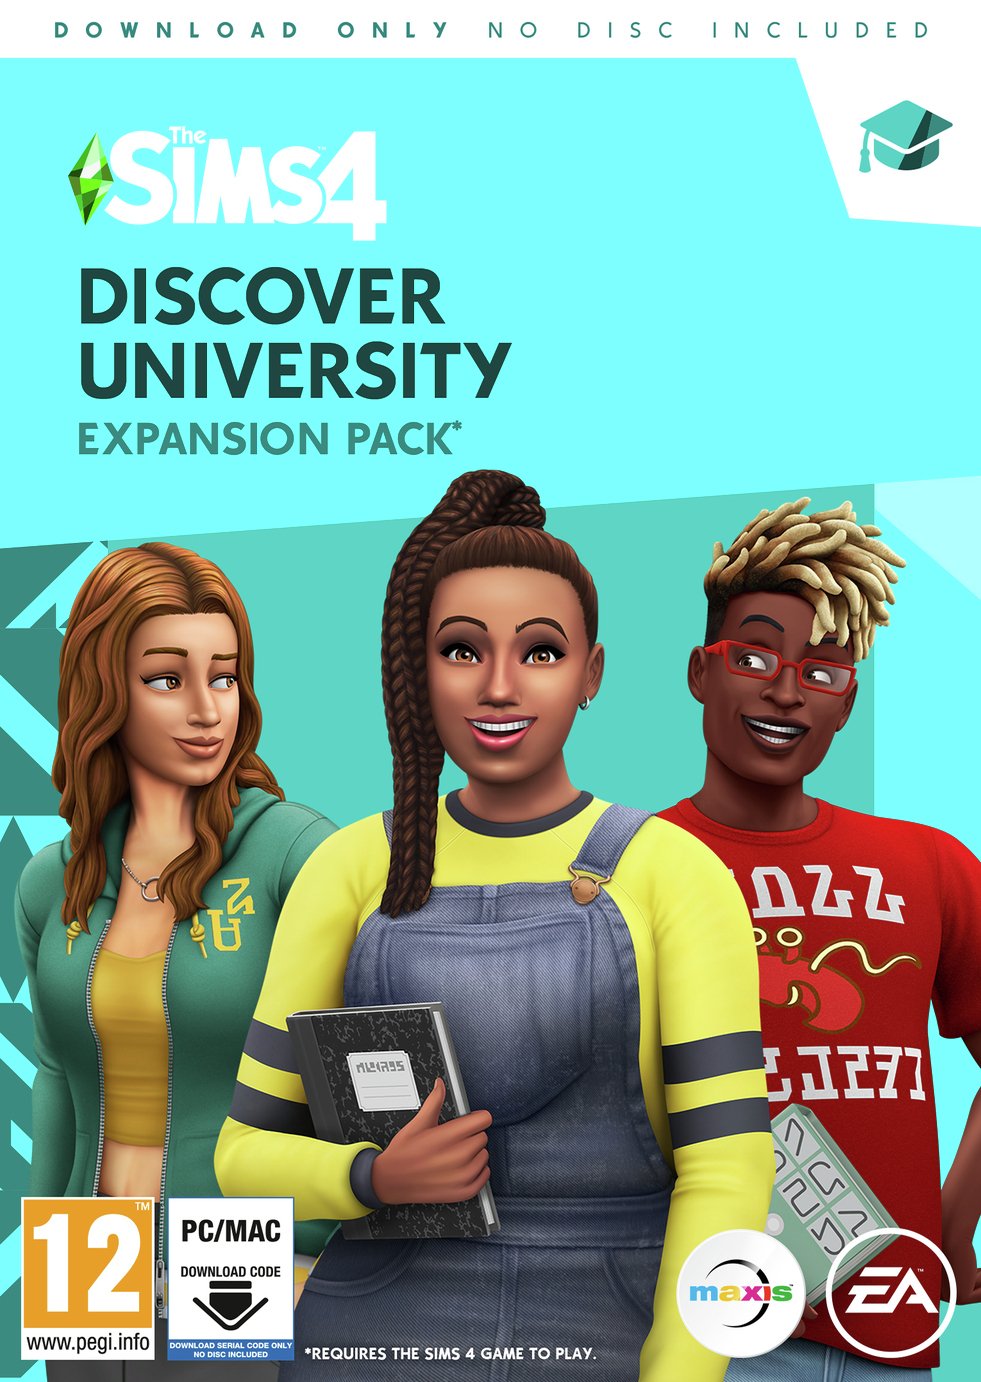 The Sims 4: Discover University Expansion Pack for PC Review